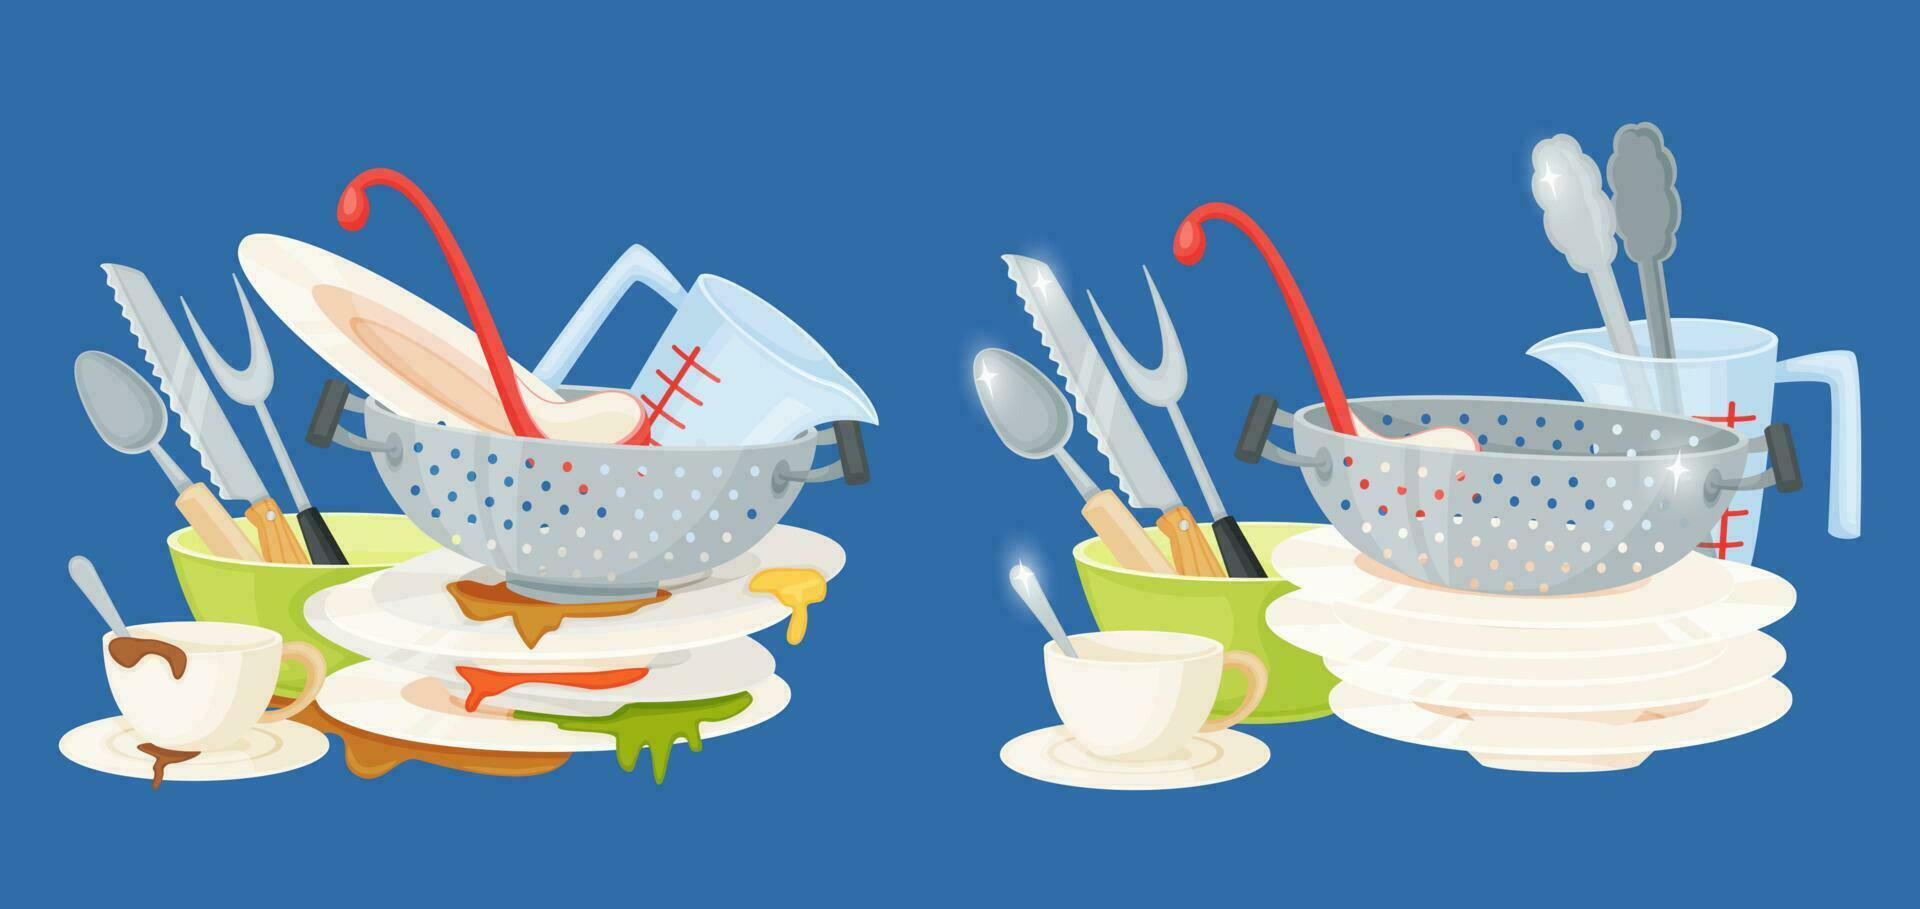 Dirty and clean dishes, piles of stained and washed kitchen utensils. Messy plates and cutlery, tableware before and after washing vector set